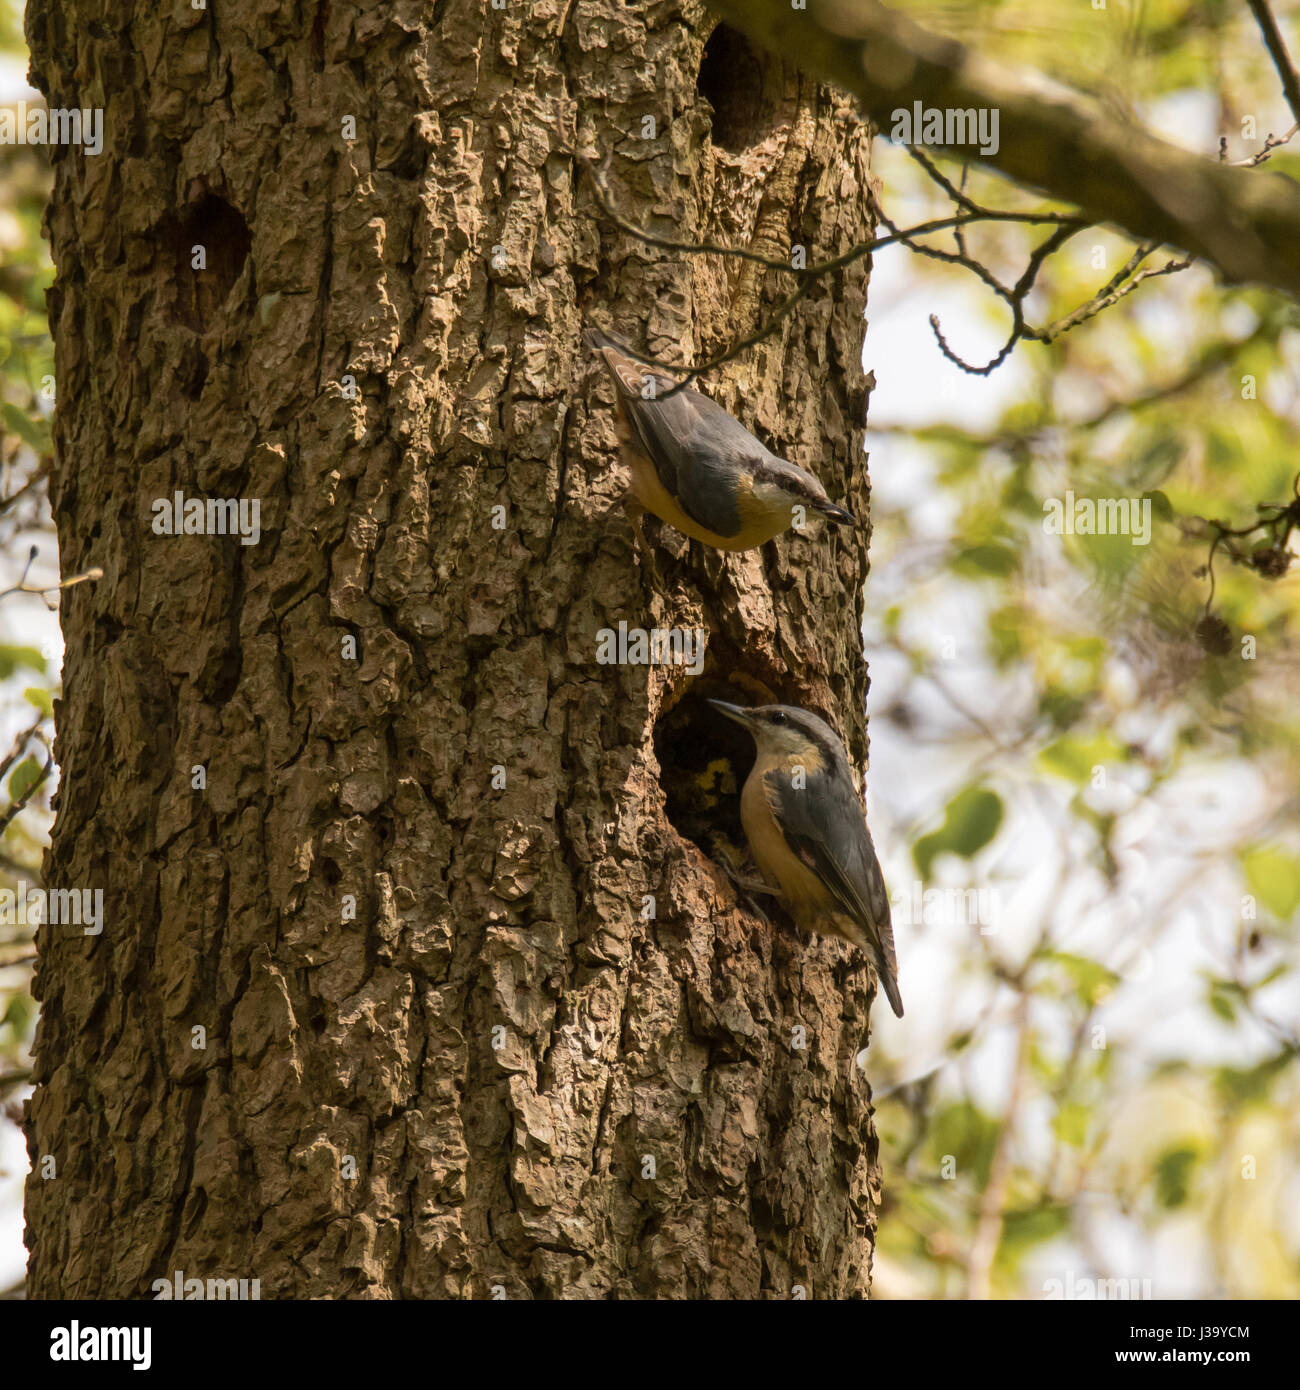 Pair of nuthatches (Sitta europaea) by nest hole. Composite of woodland birds in the family Sittidae, visiting nesting hole to feed chicks Stock Photo